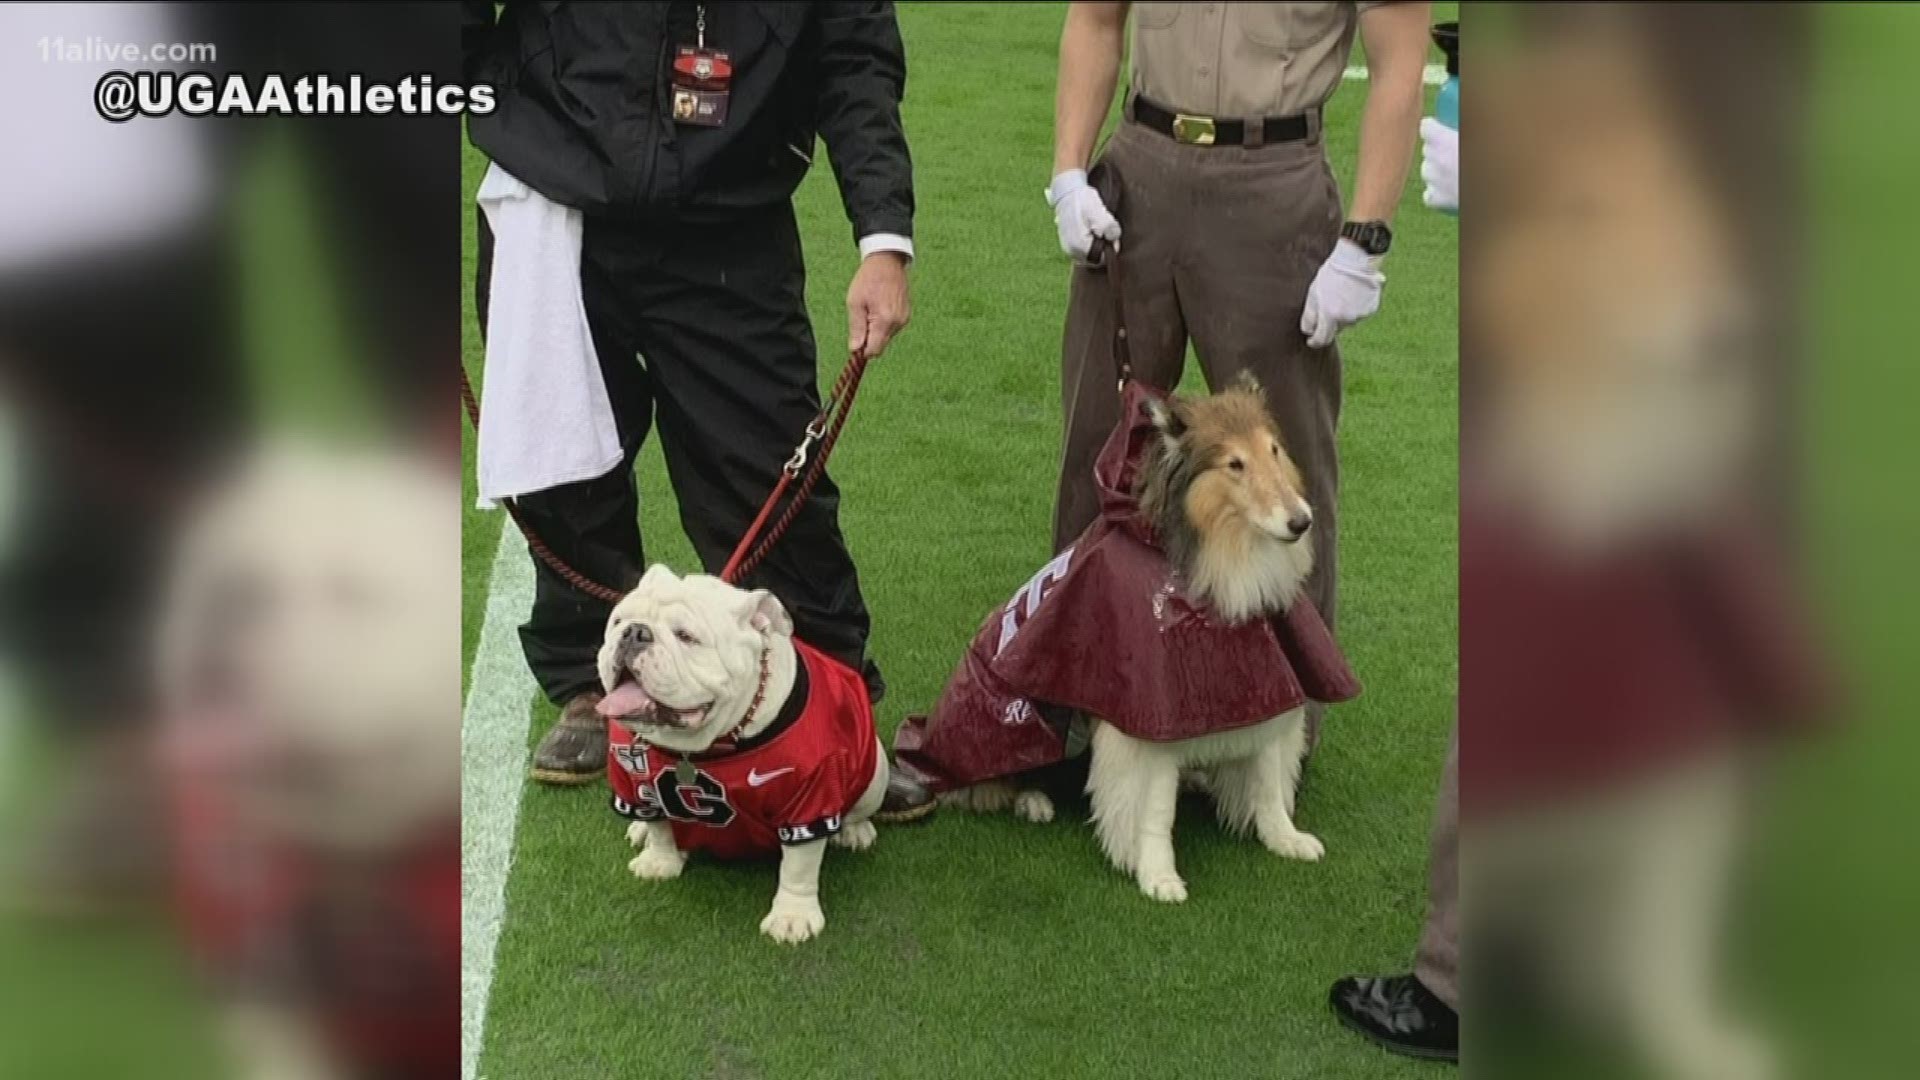 The Bulldogs mascot met the official dog of Texas A&M for the first time between the hedges during Saturday's matchup.